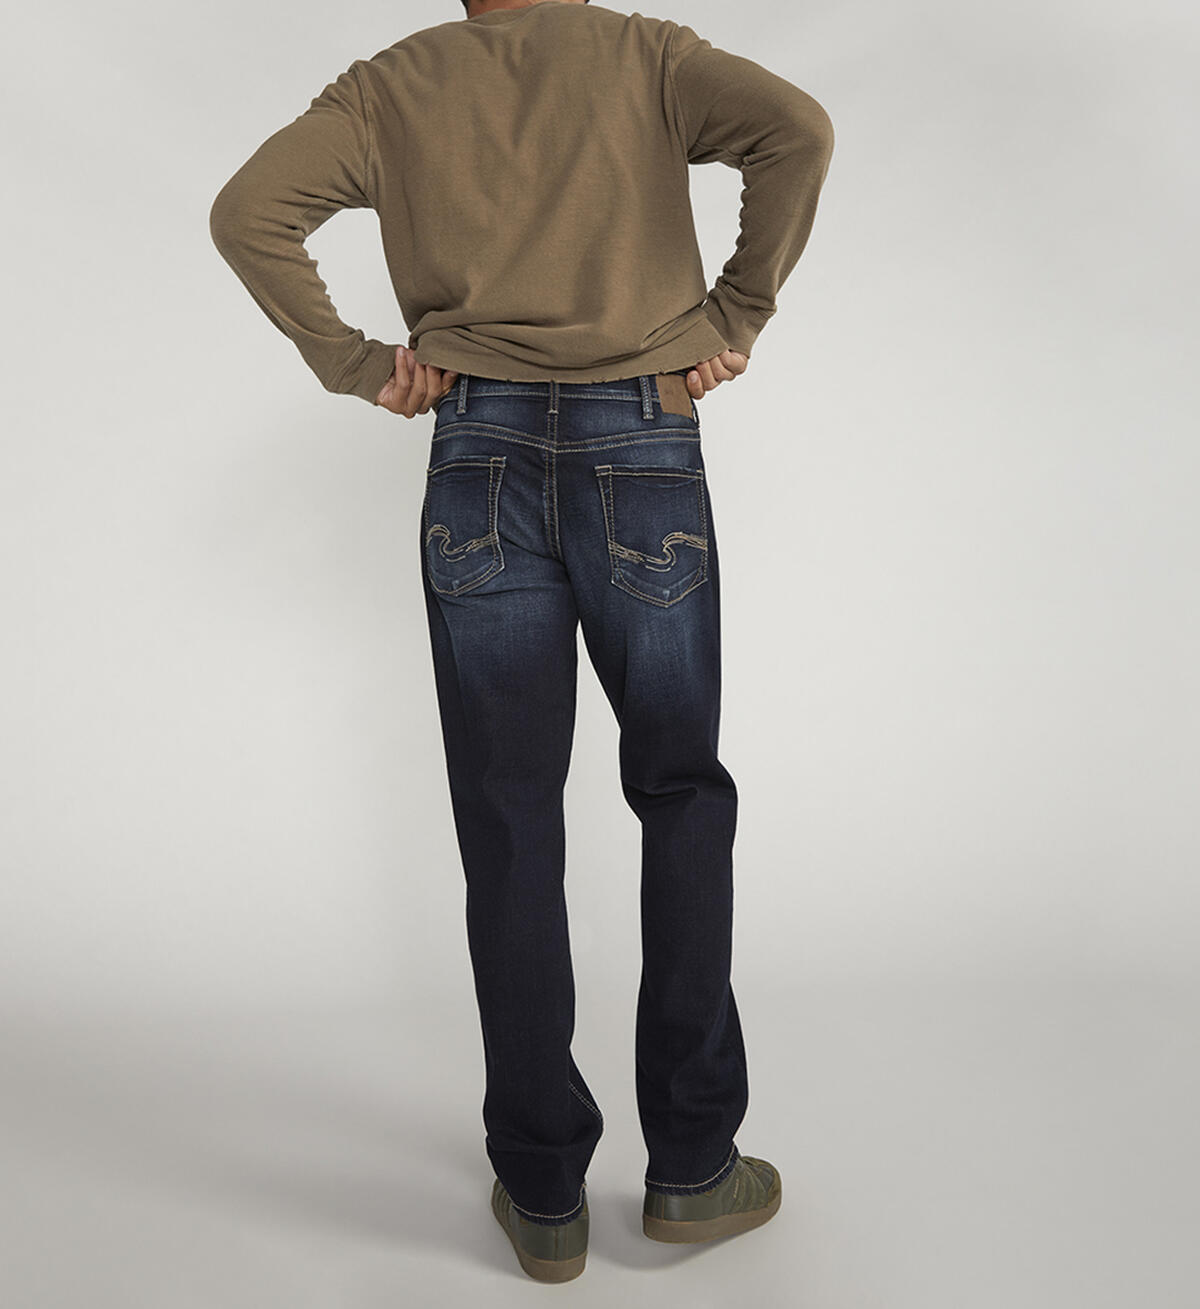 Hunter Relaxed Athletic Fit Straight Leg Jeans, Indigo, hi-res image number 2